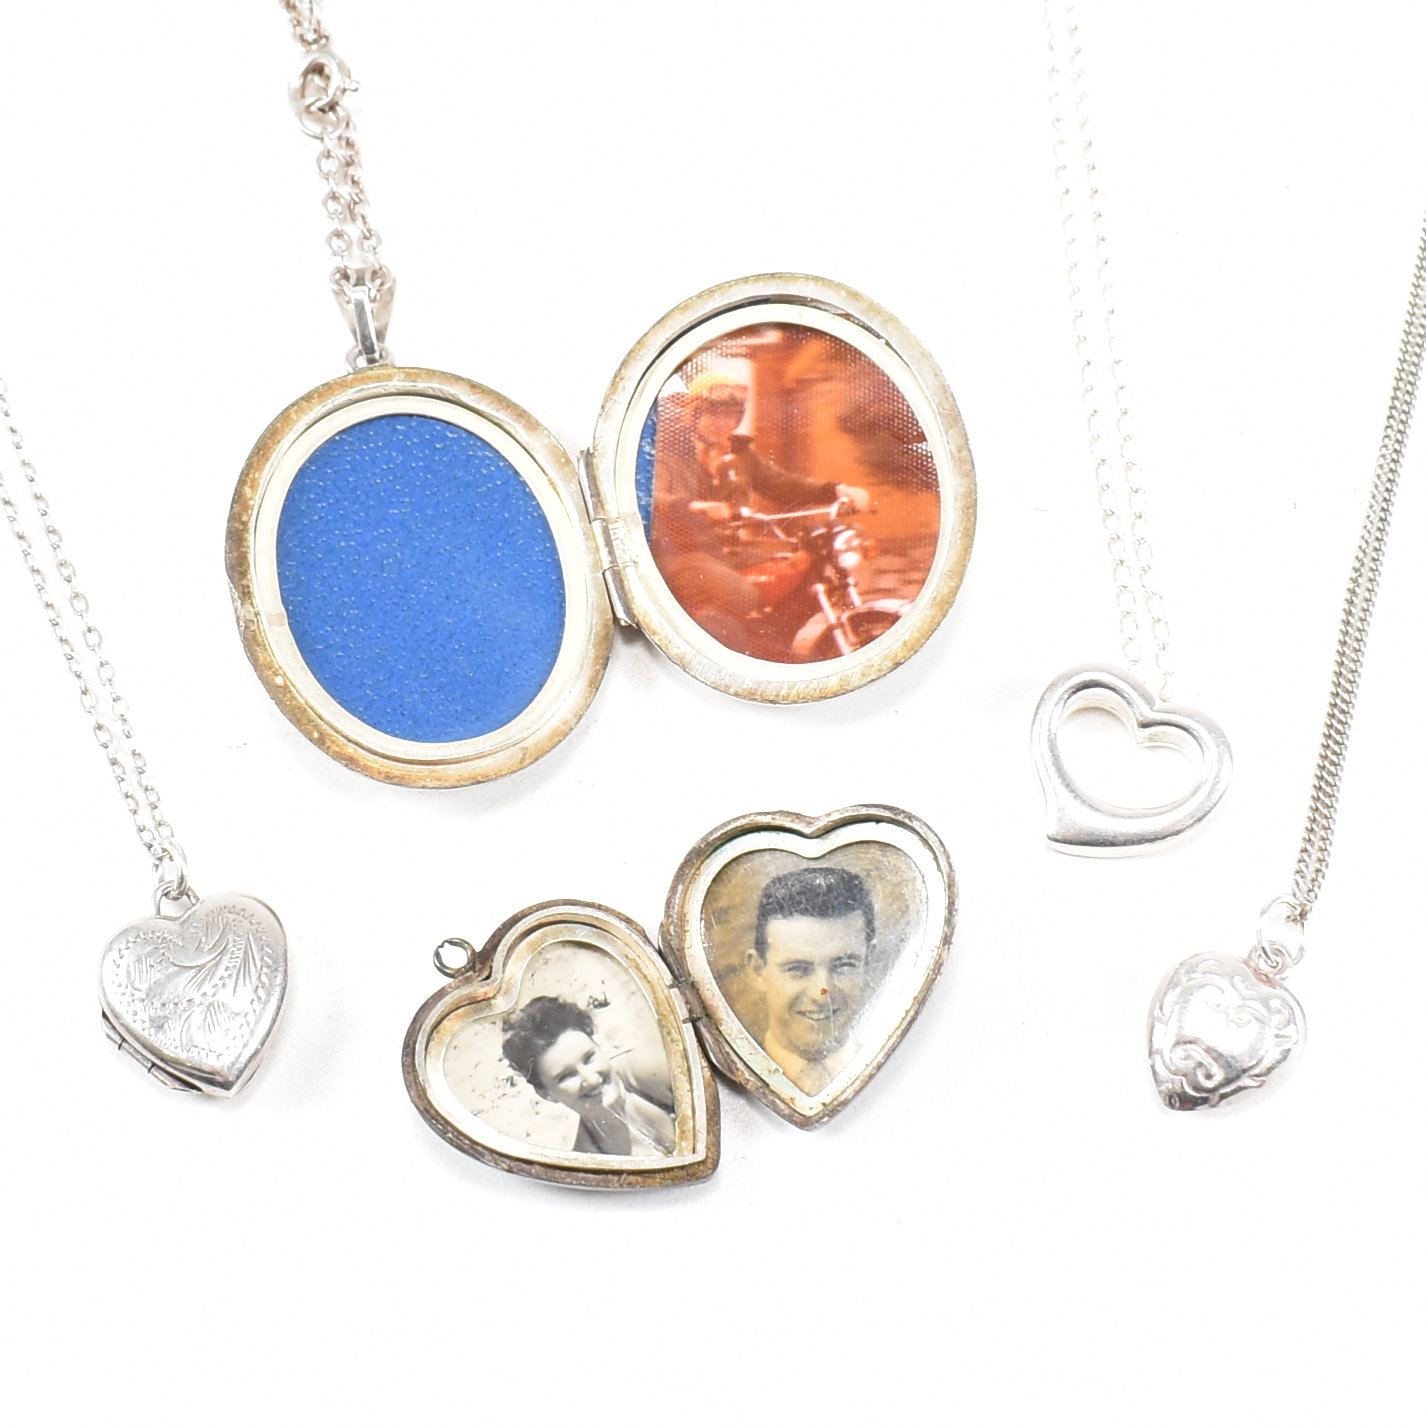 COLLECTION OF SILVER HEART PENDANT NECKLACES - Image 5 of 6